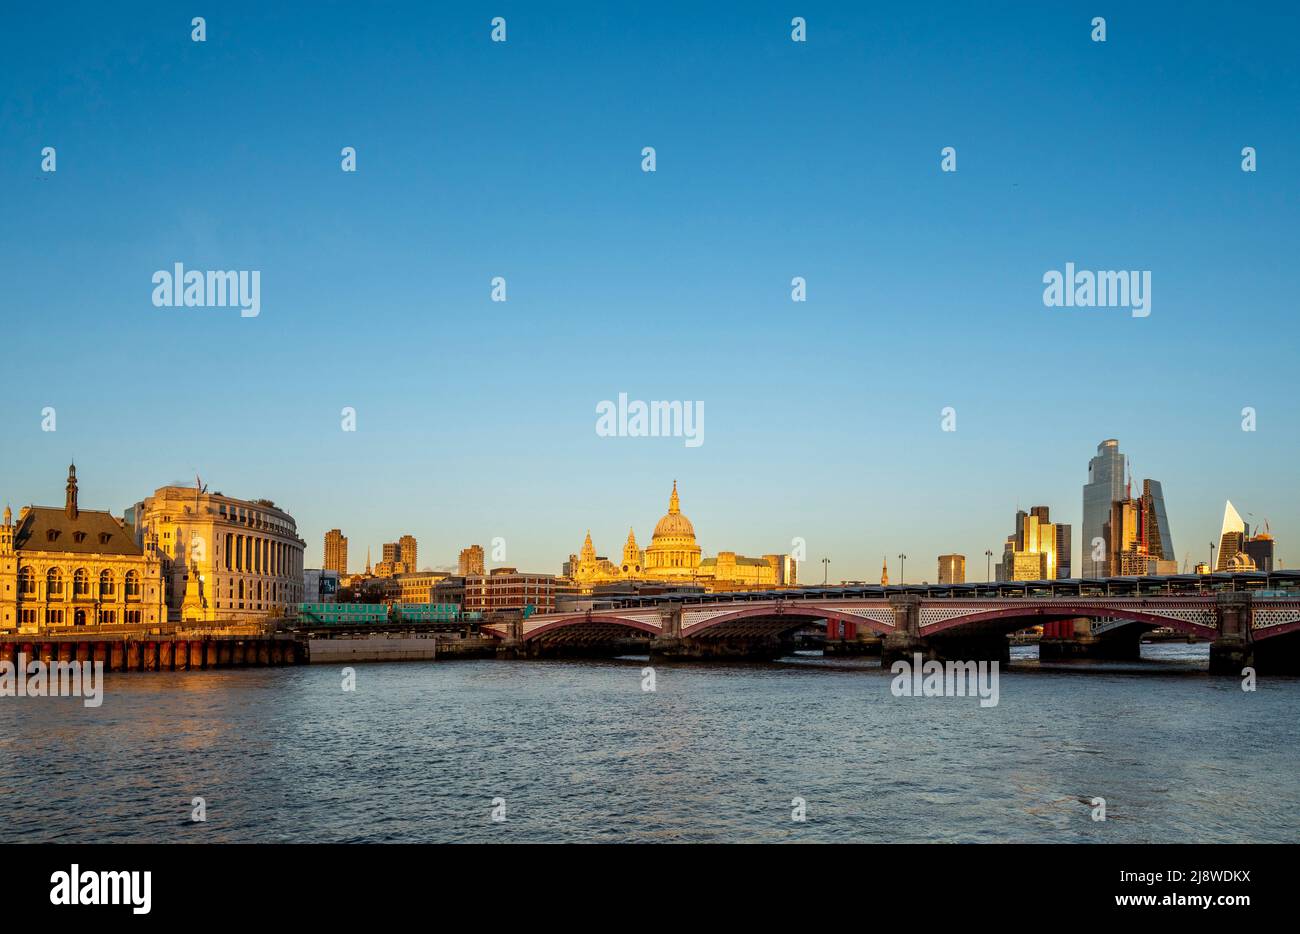 Blackfriars bridge crossing the river Thames with St Paul's Cathedral, bathed in golden late afternoon light in the distance. London UK. Stock Photo